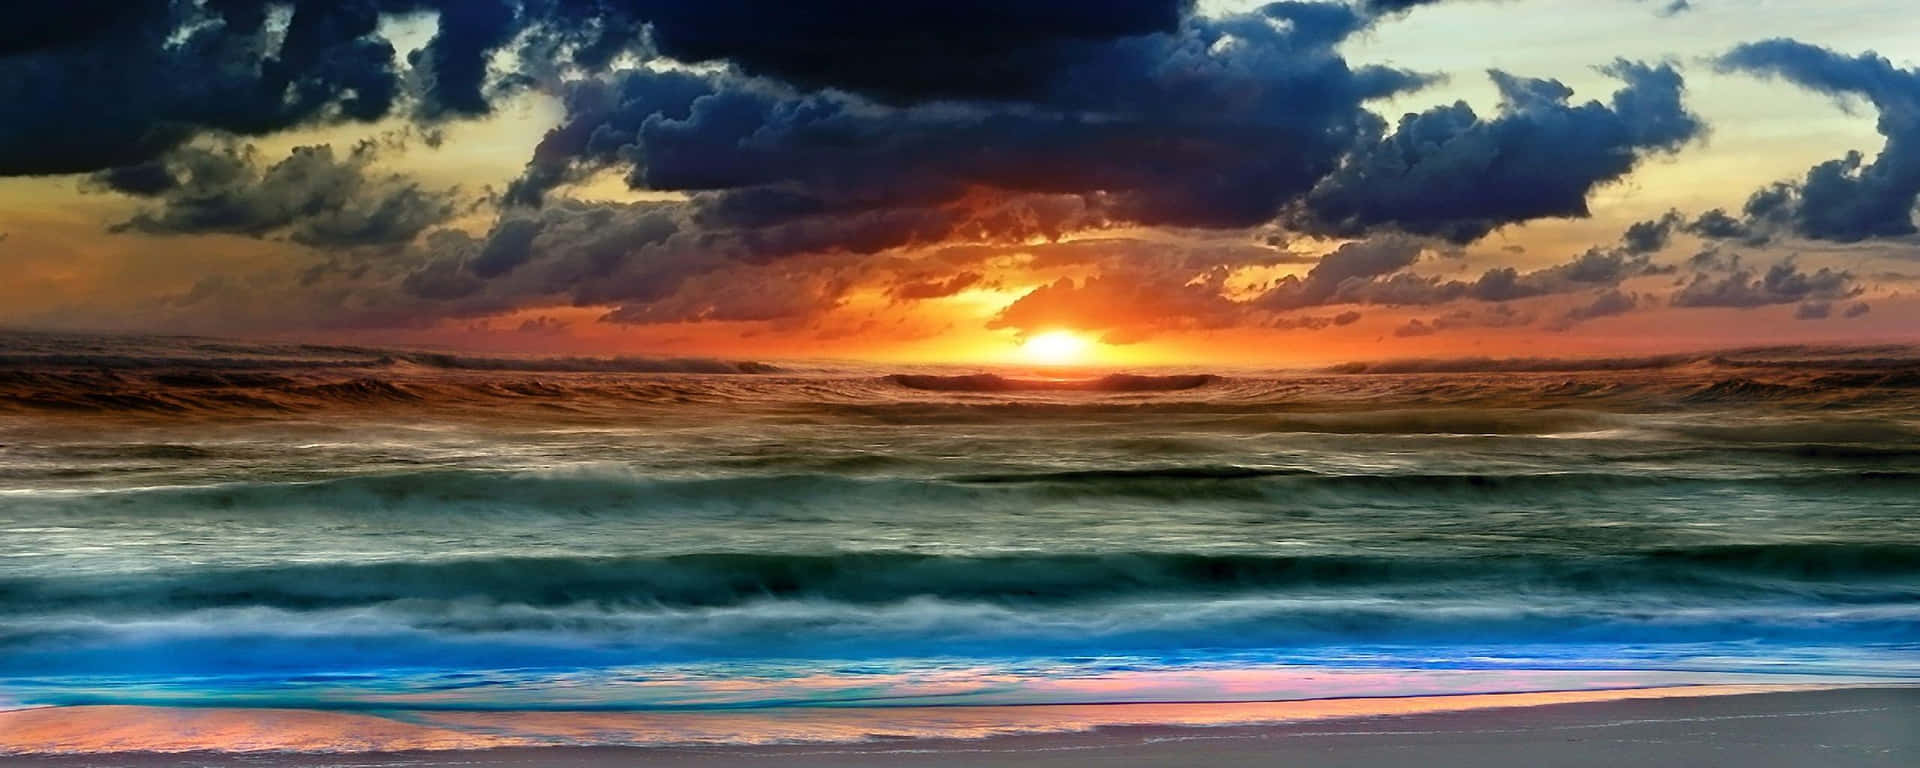 A Painting Of A Sunset Over The Ocean Background